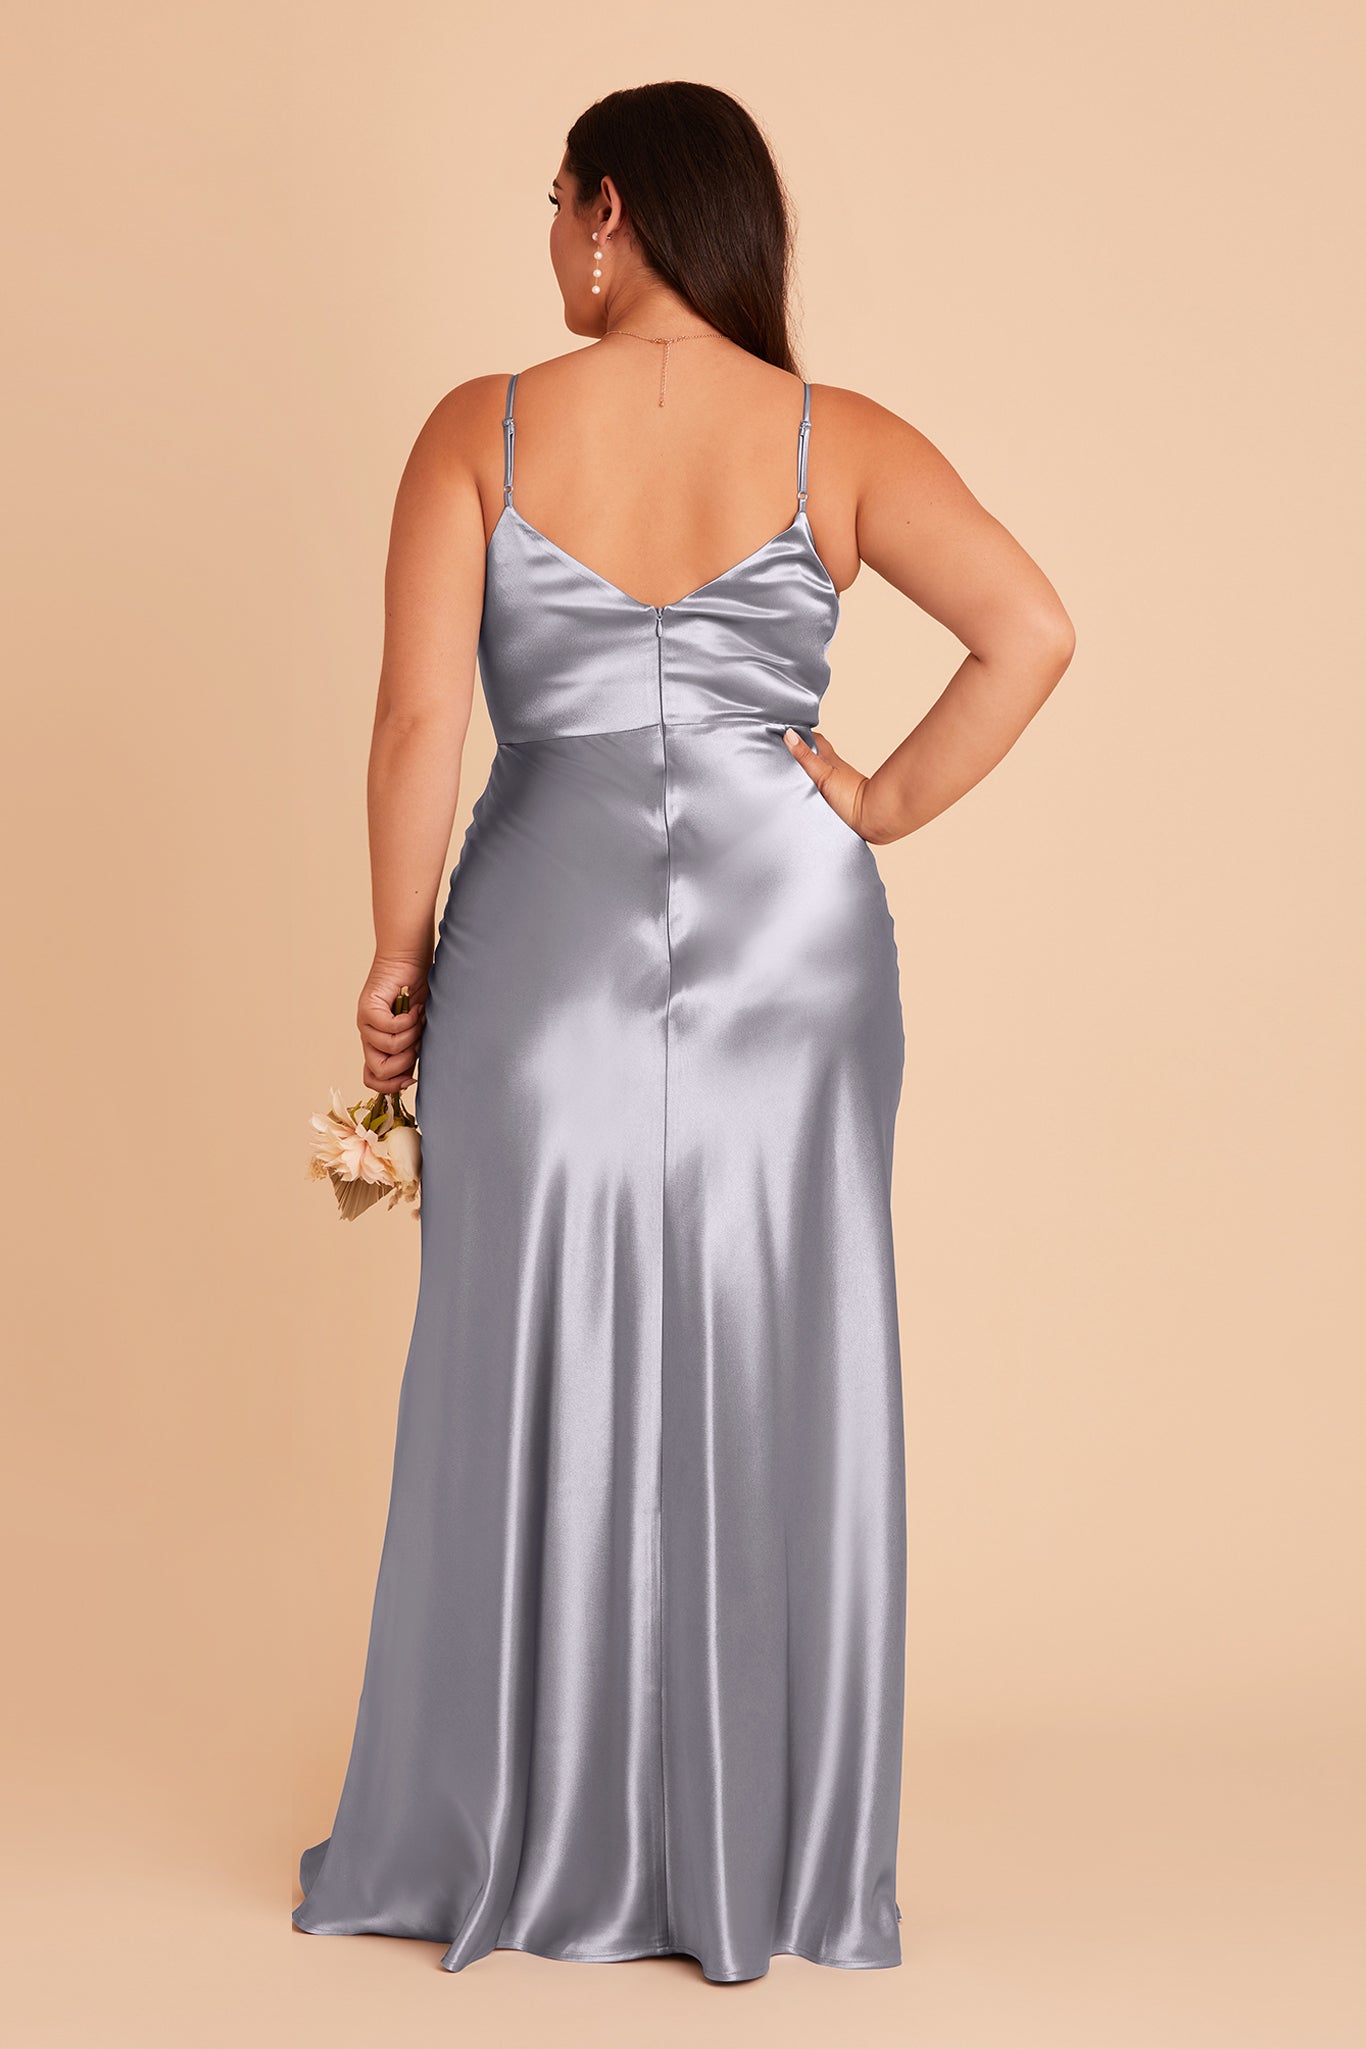 Jay plus size bridesmaid dress with slit in dusty blue satin by Birdy Grey, back view